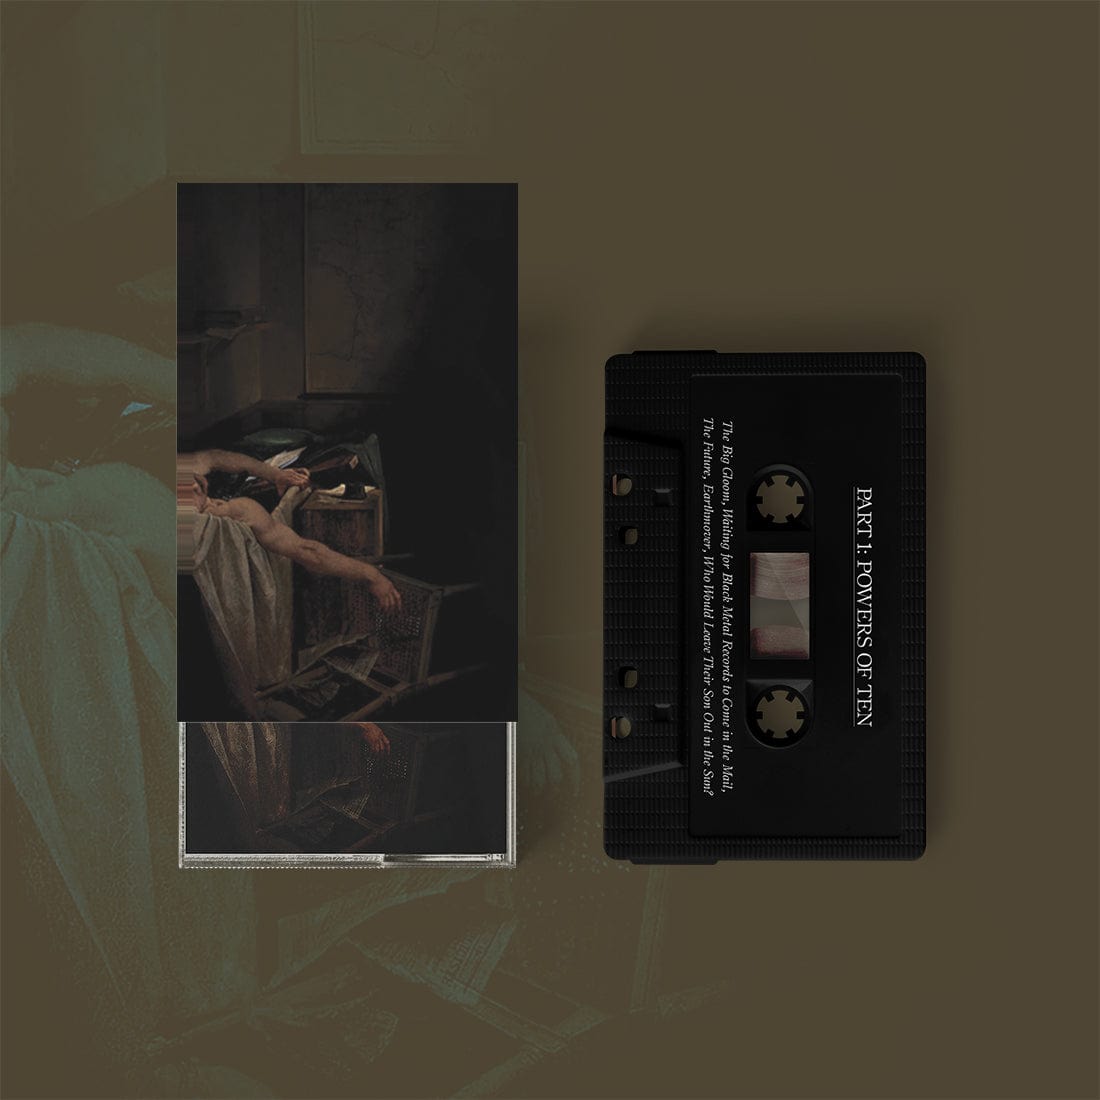 The Flenser Tapes Have a Nice Life "Voids" Tape